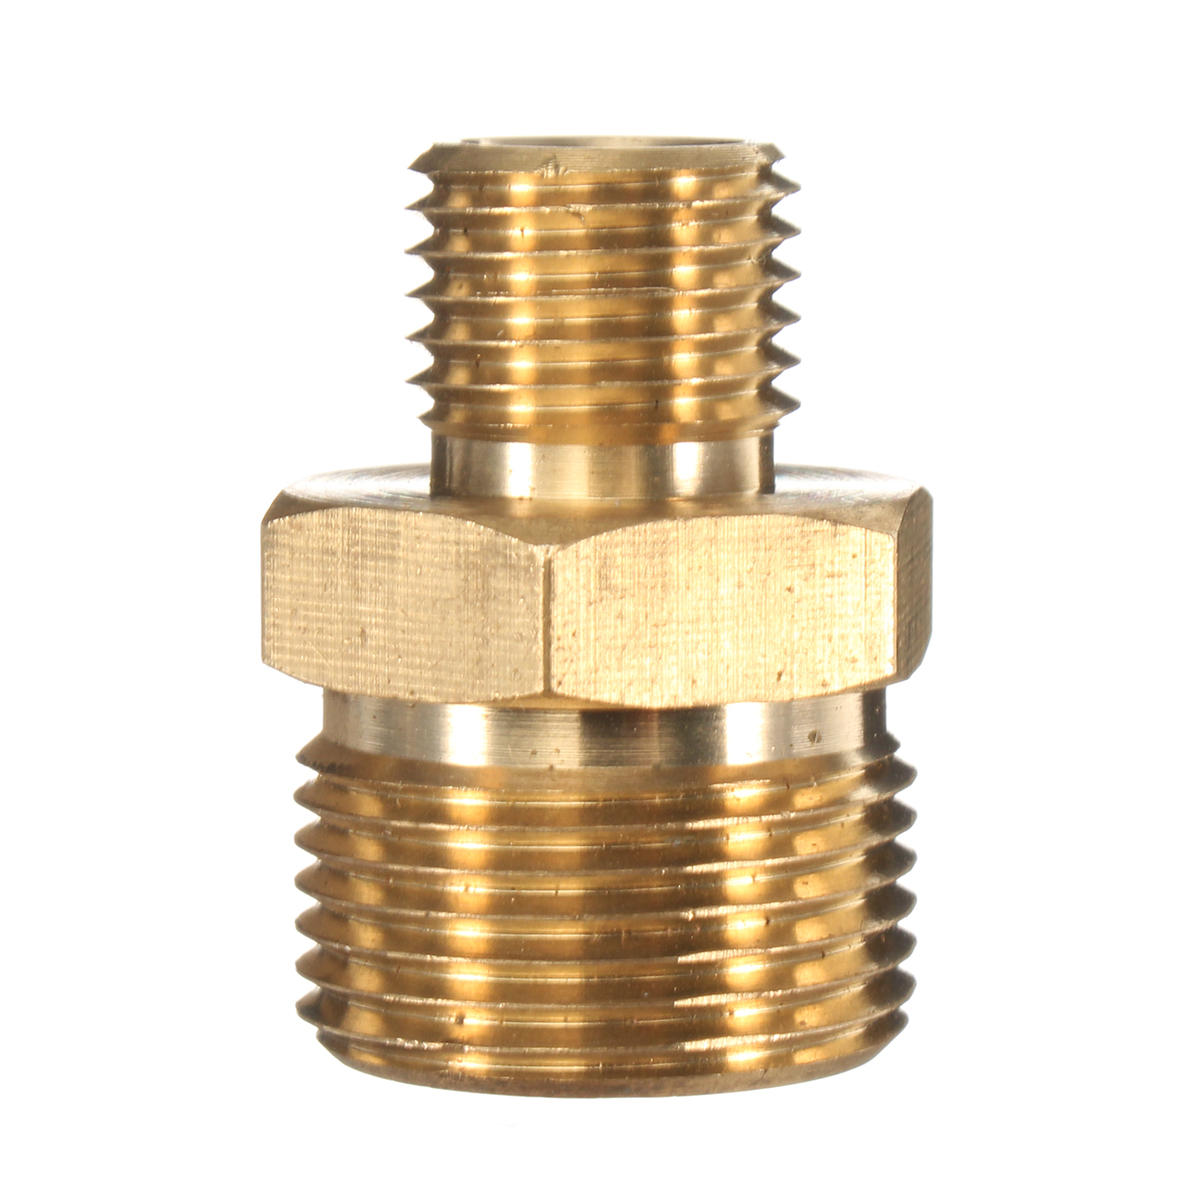 M22 Male to 1/4" Male Adapter Brass Pressure Washer Hose Quick Connect Coupling Fitting for Karcher